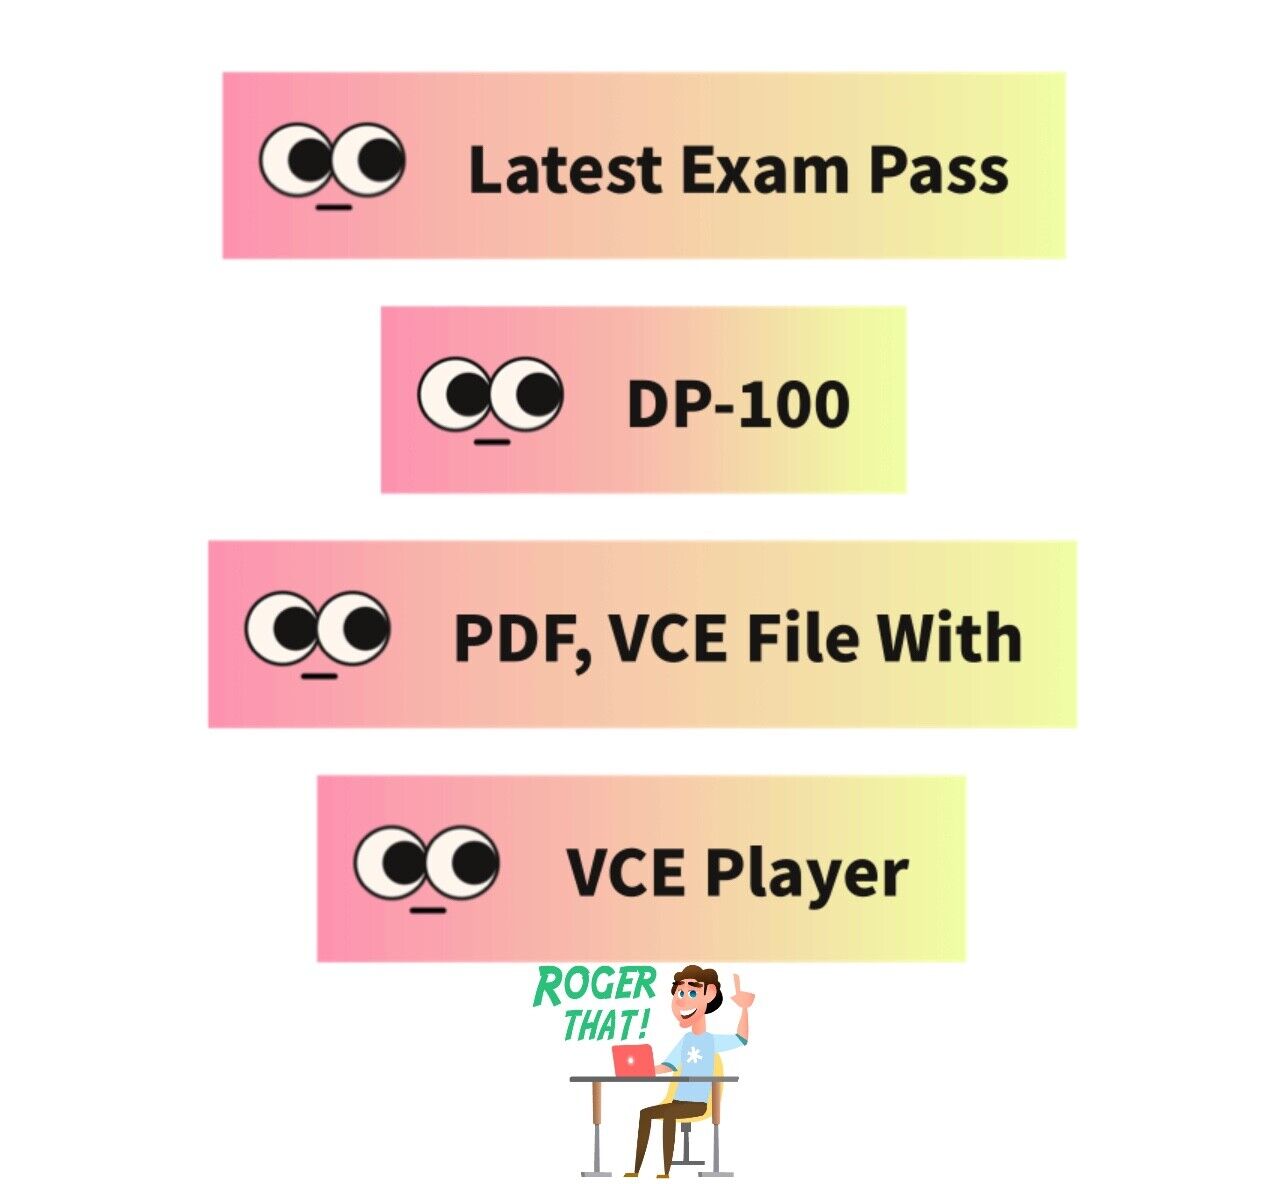 DP-100 VCE test, PDF,VCE exam JANUARY 2023 update 280 Questions